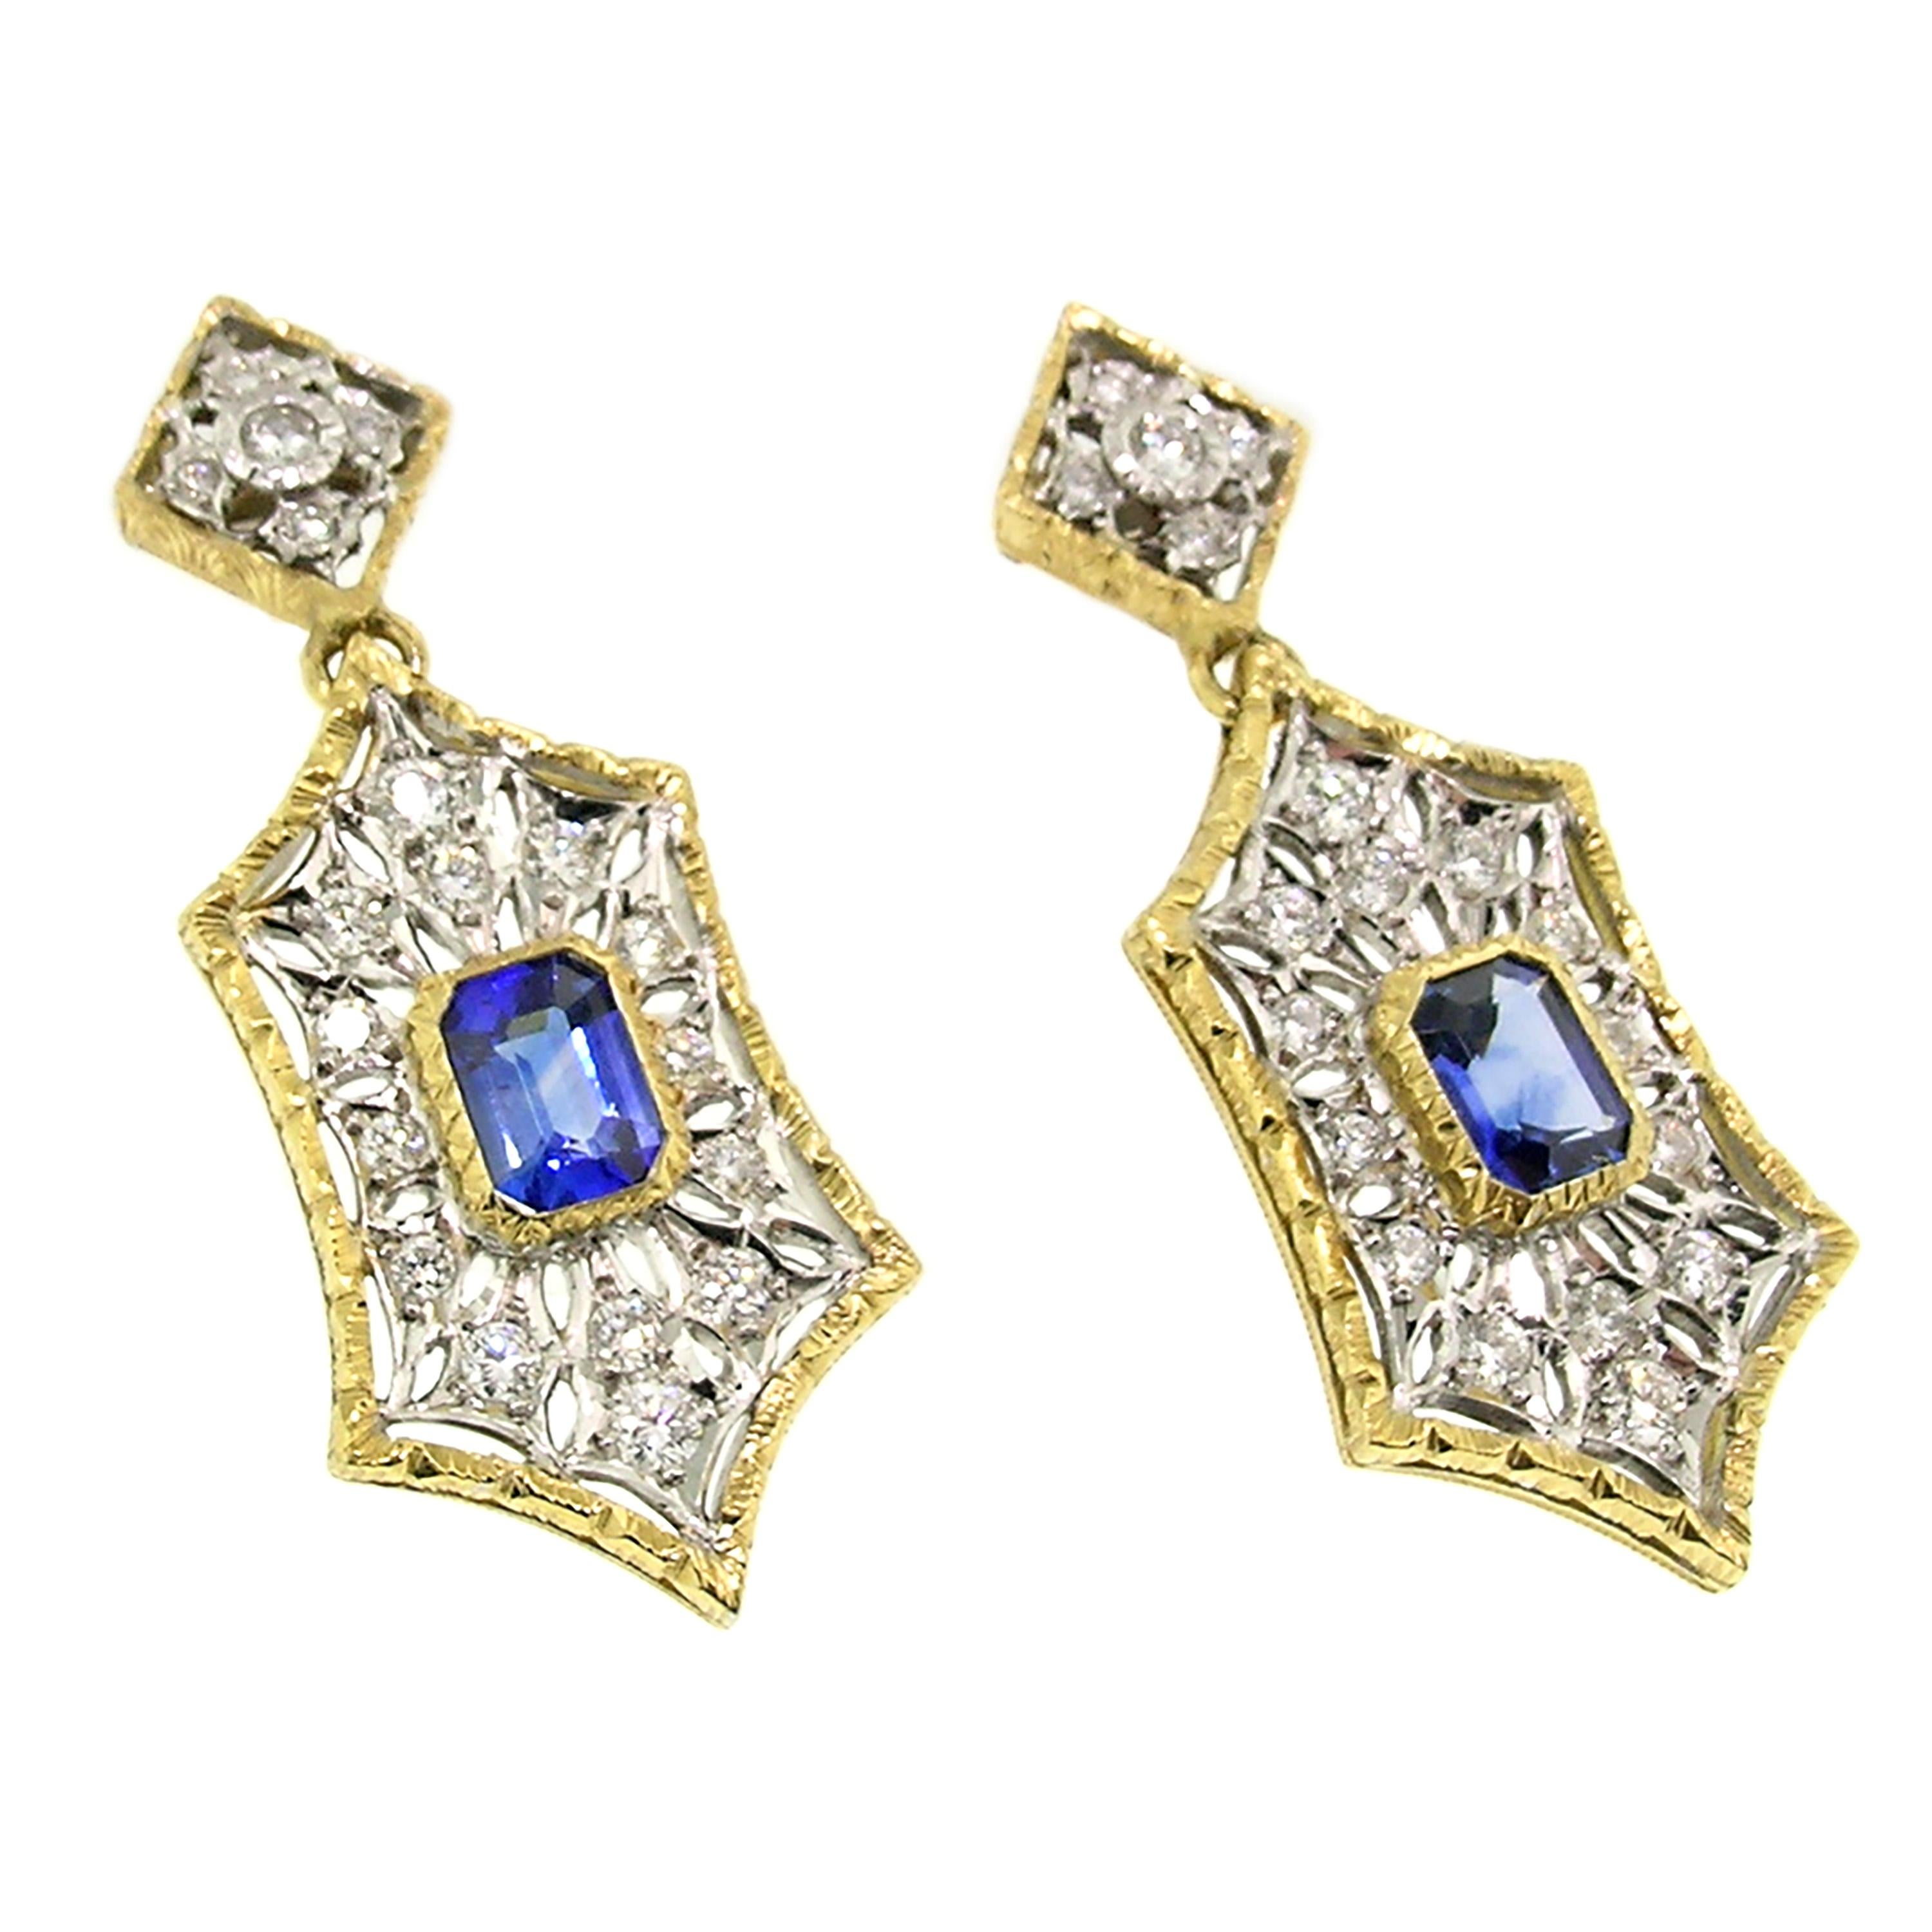 Emerald Cut 1.84ct Ceylon Sapphire and Diamond 18kt Earrings, Made in Italy by Cynthia Scott For Sale